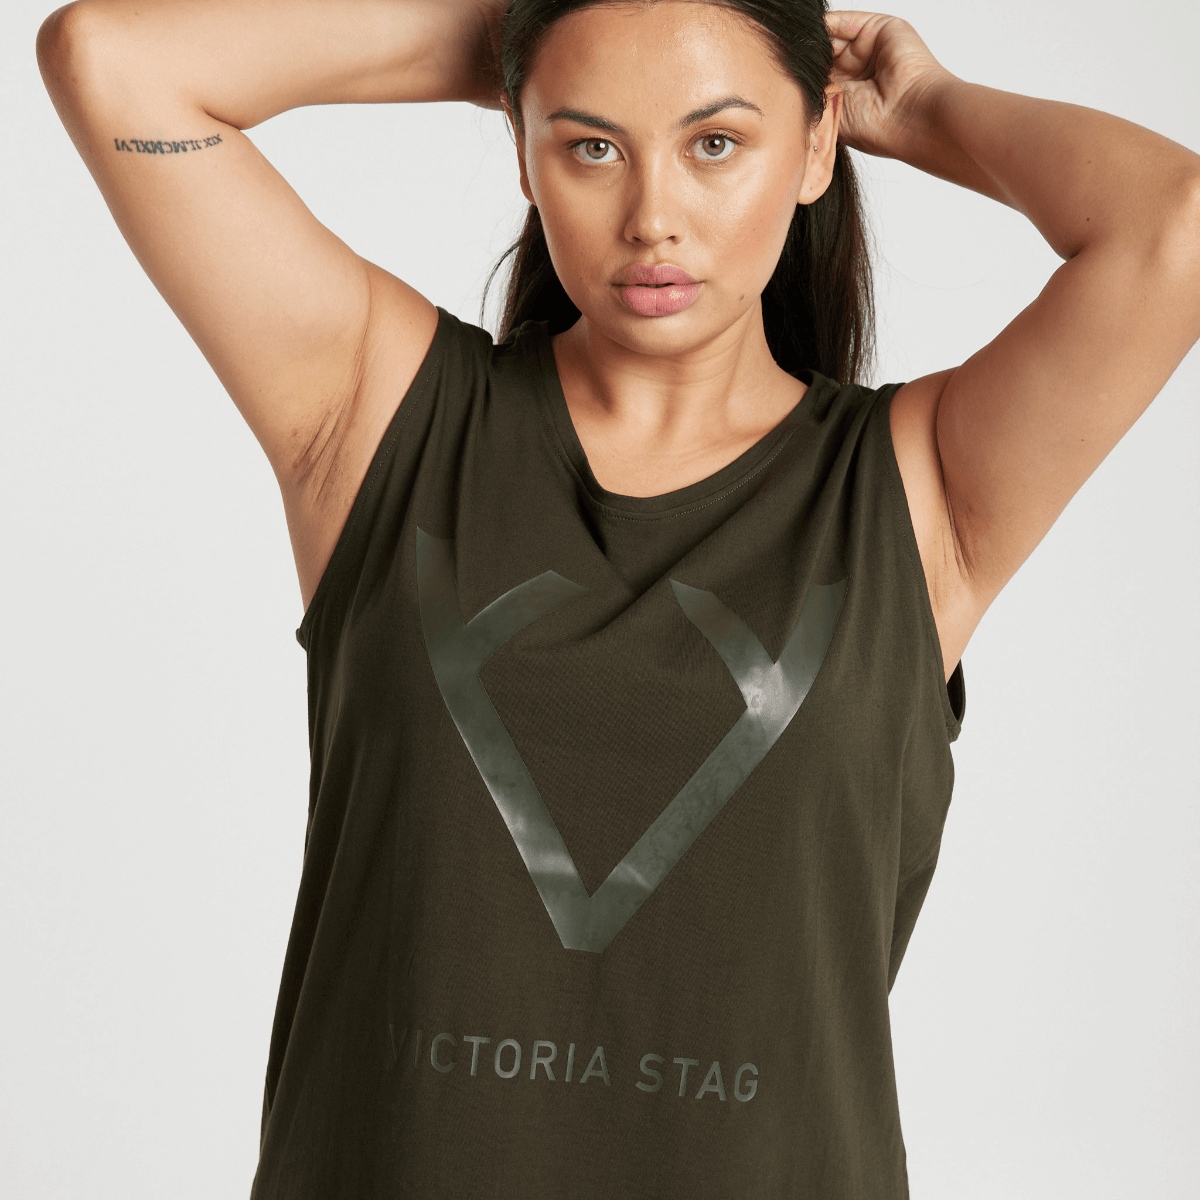 Victoria Stag's Core Muscle Tank in Khaki front closer look